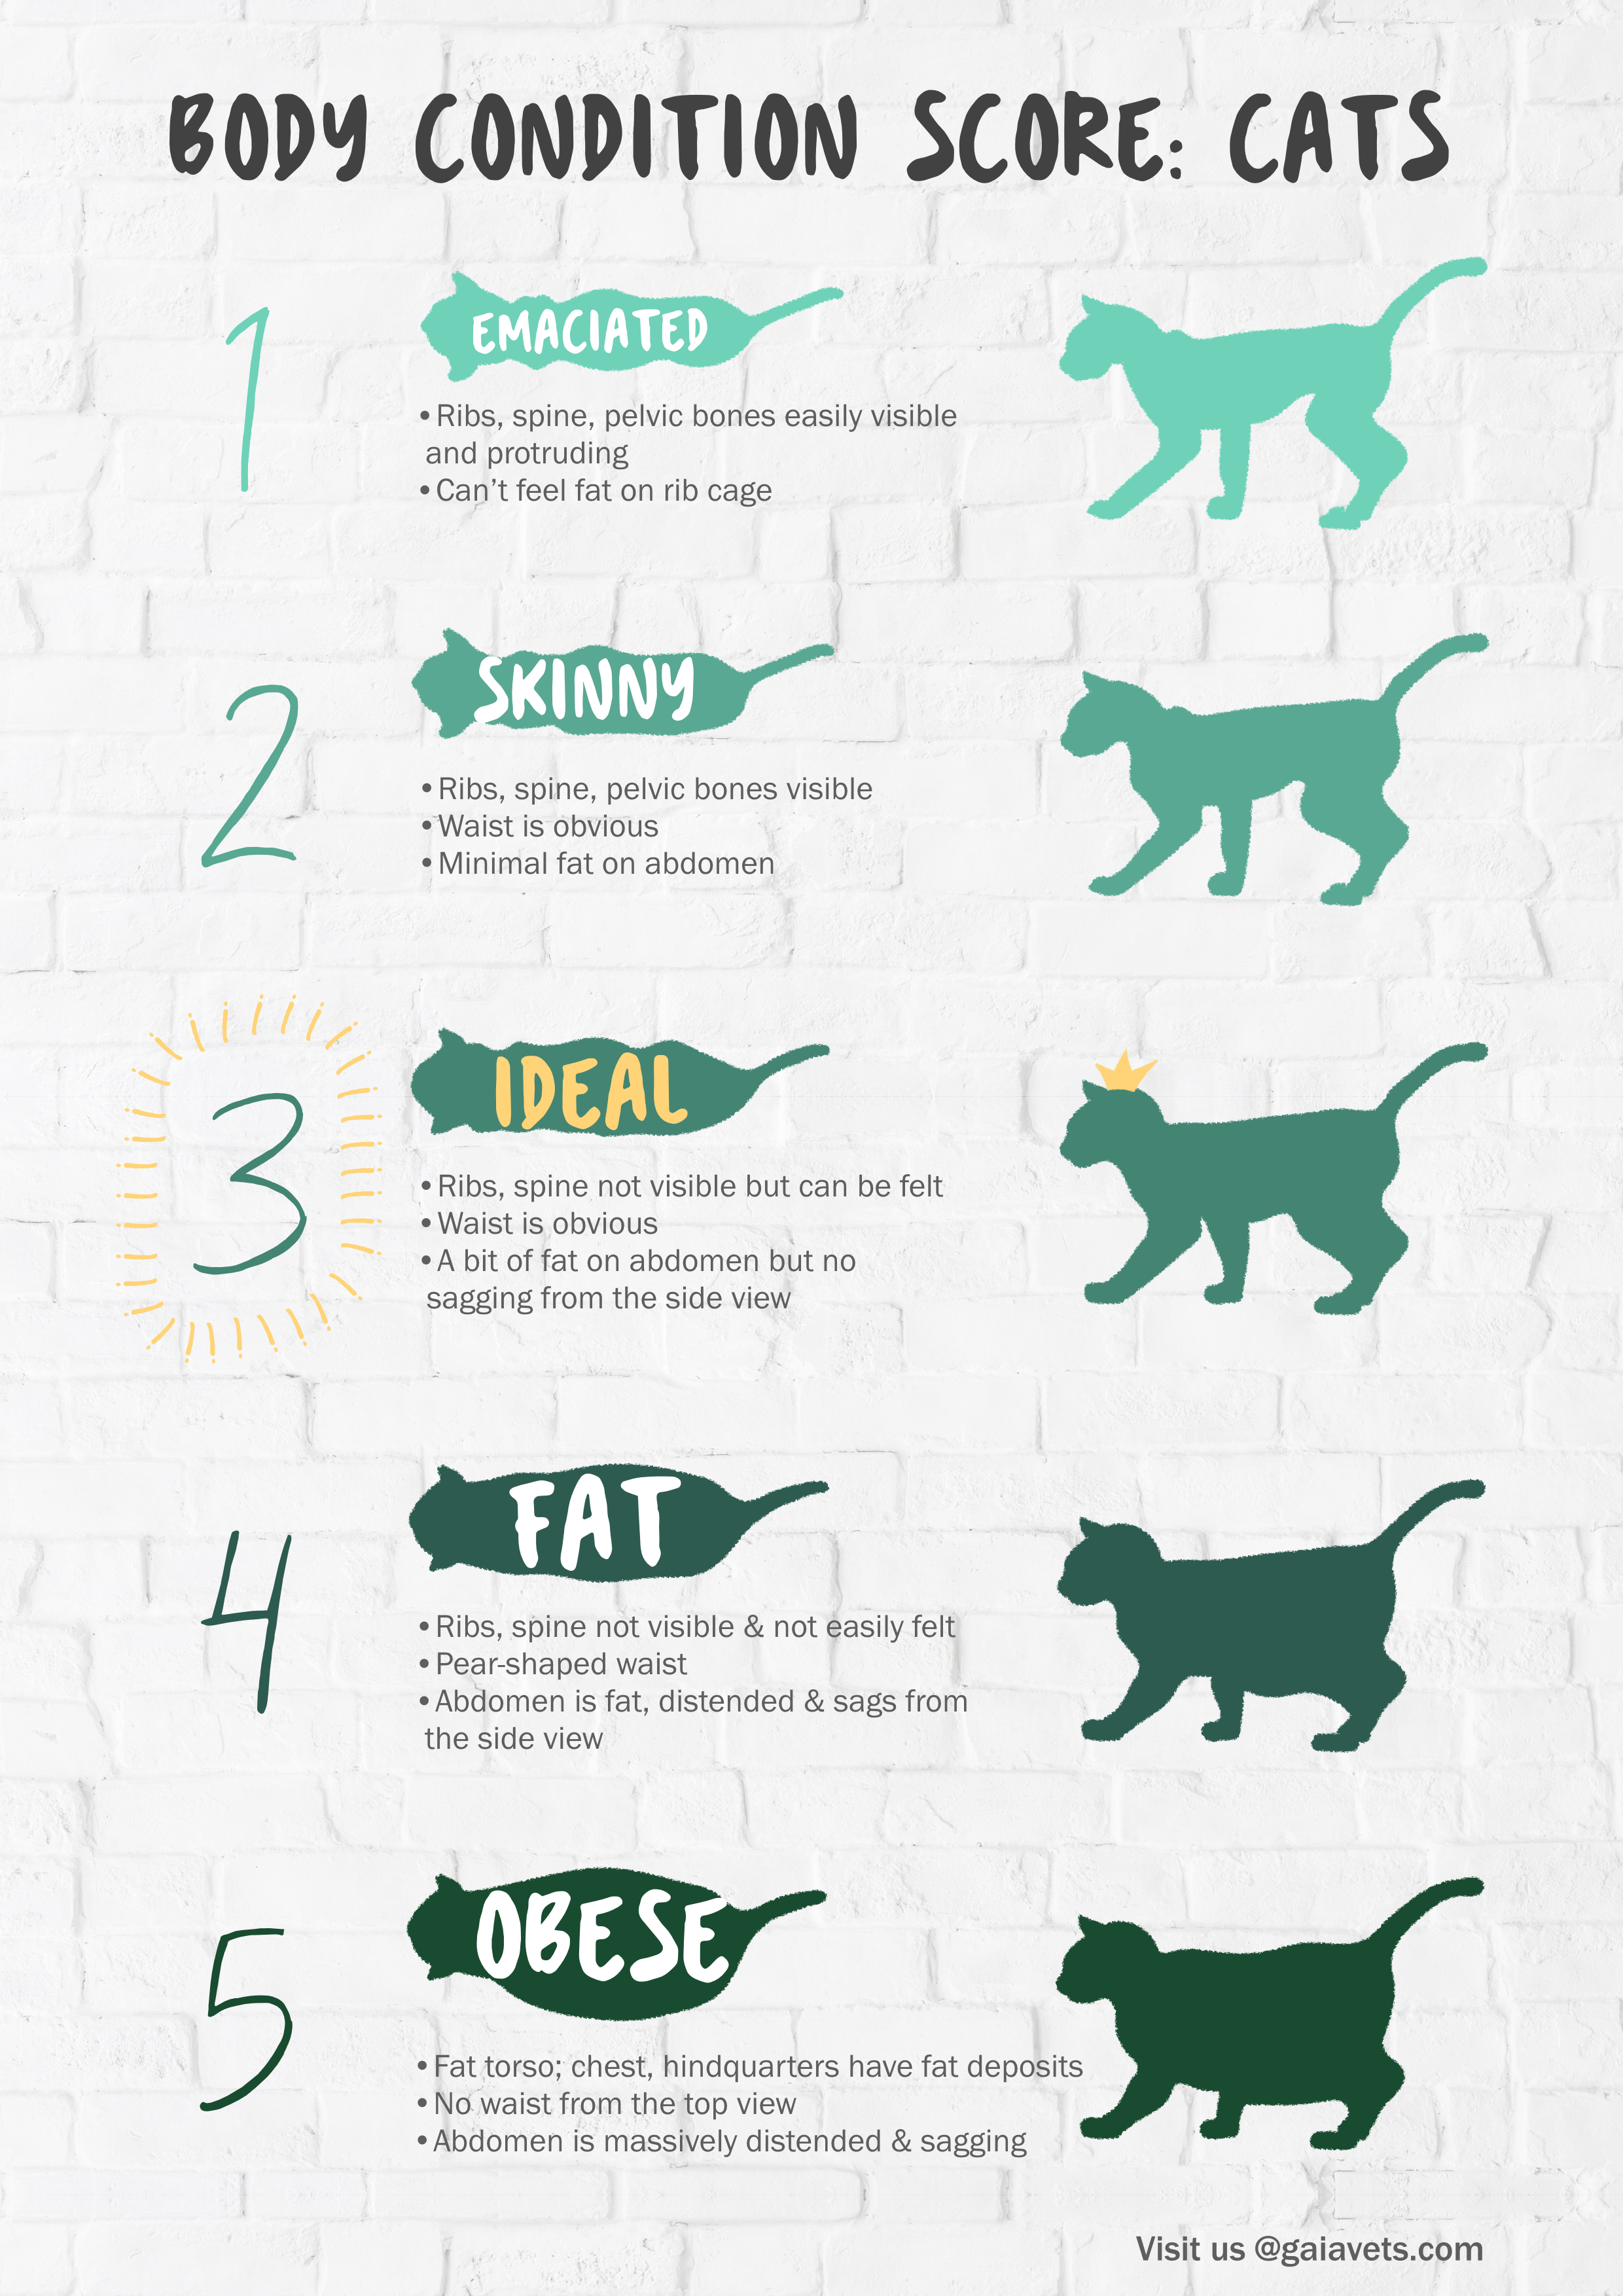 Obesity Chart For Cats